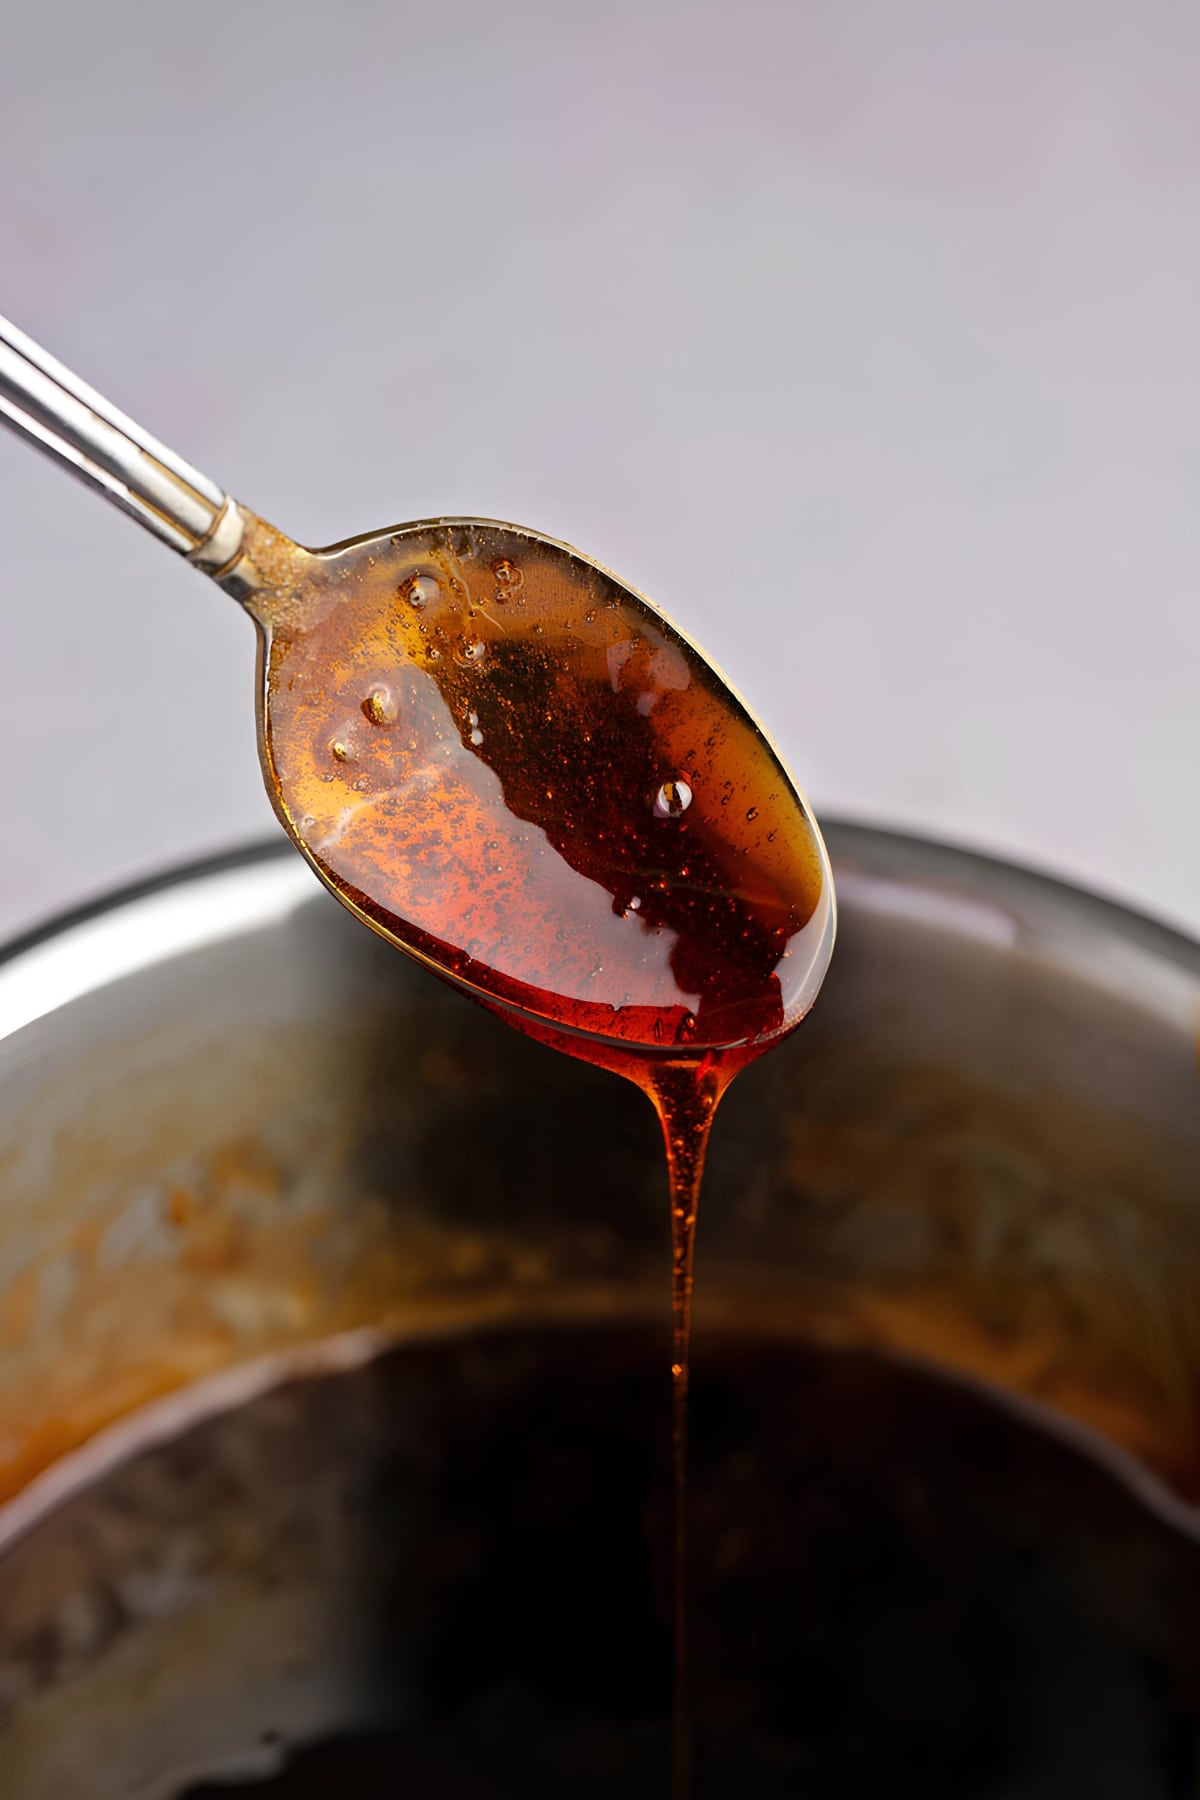 A spoonful of sweet and sticky soy glaze